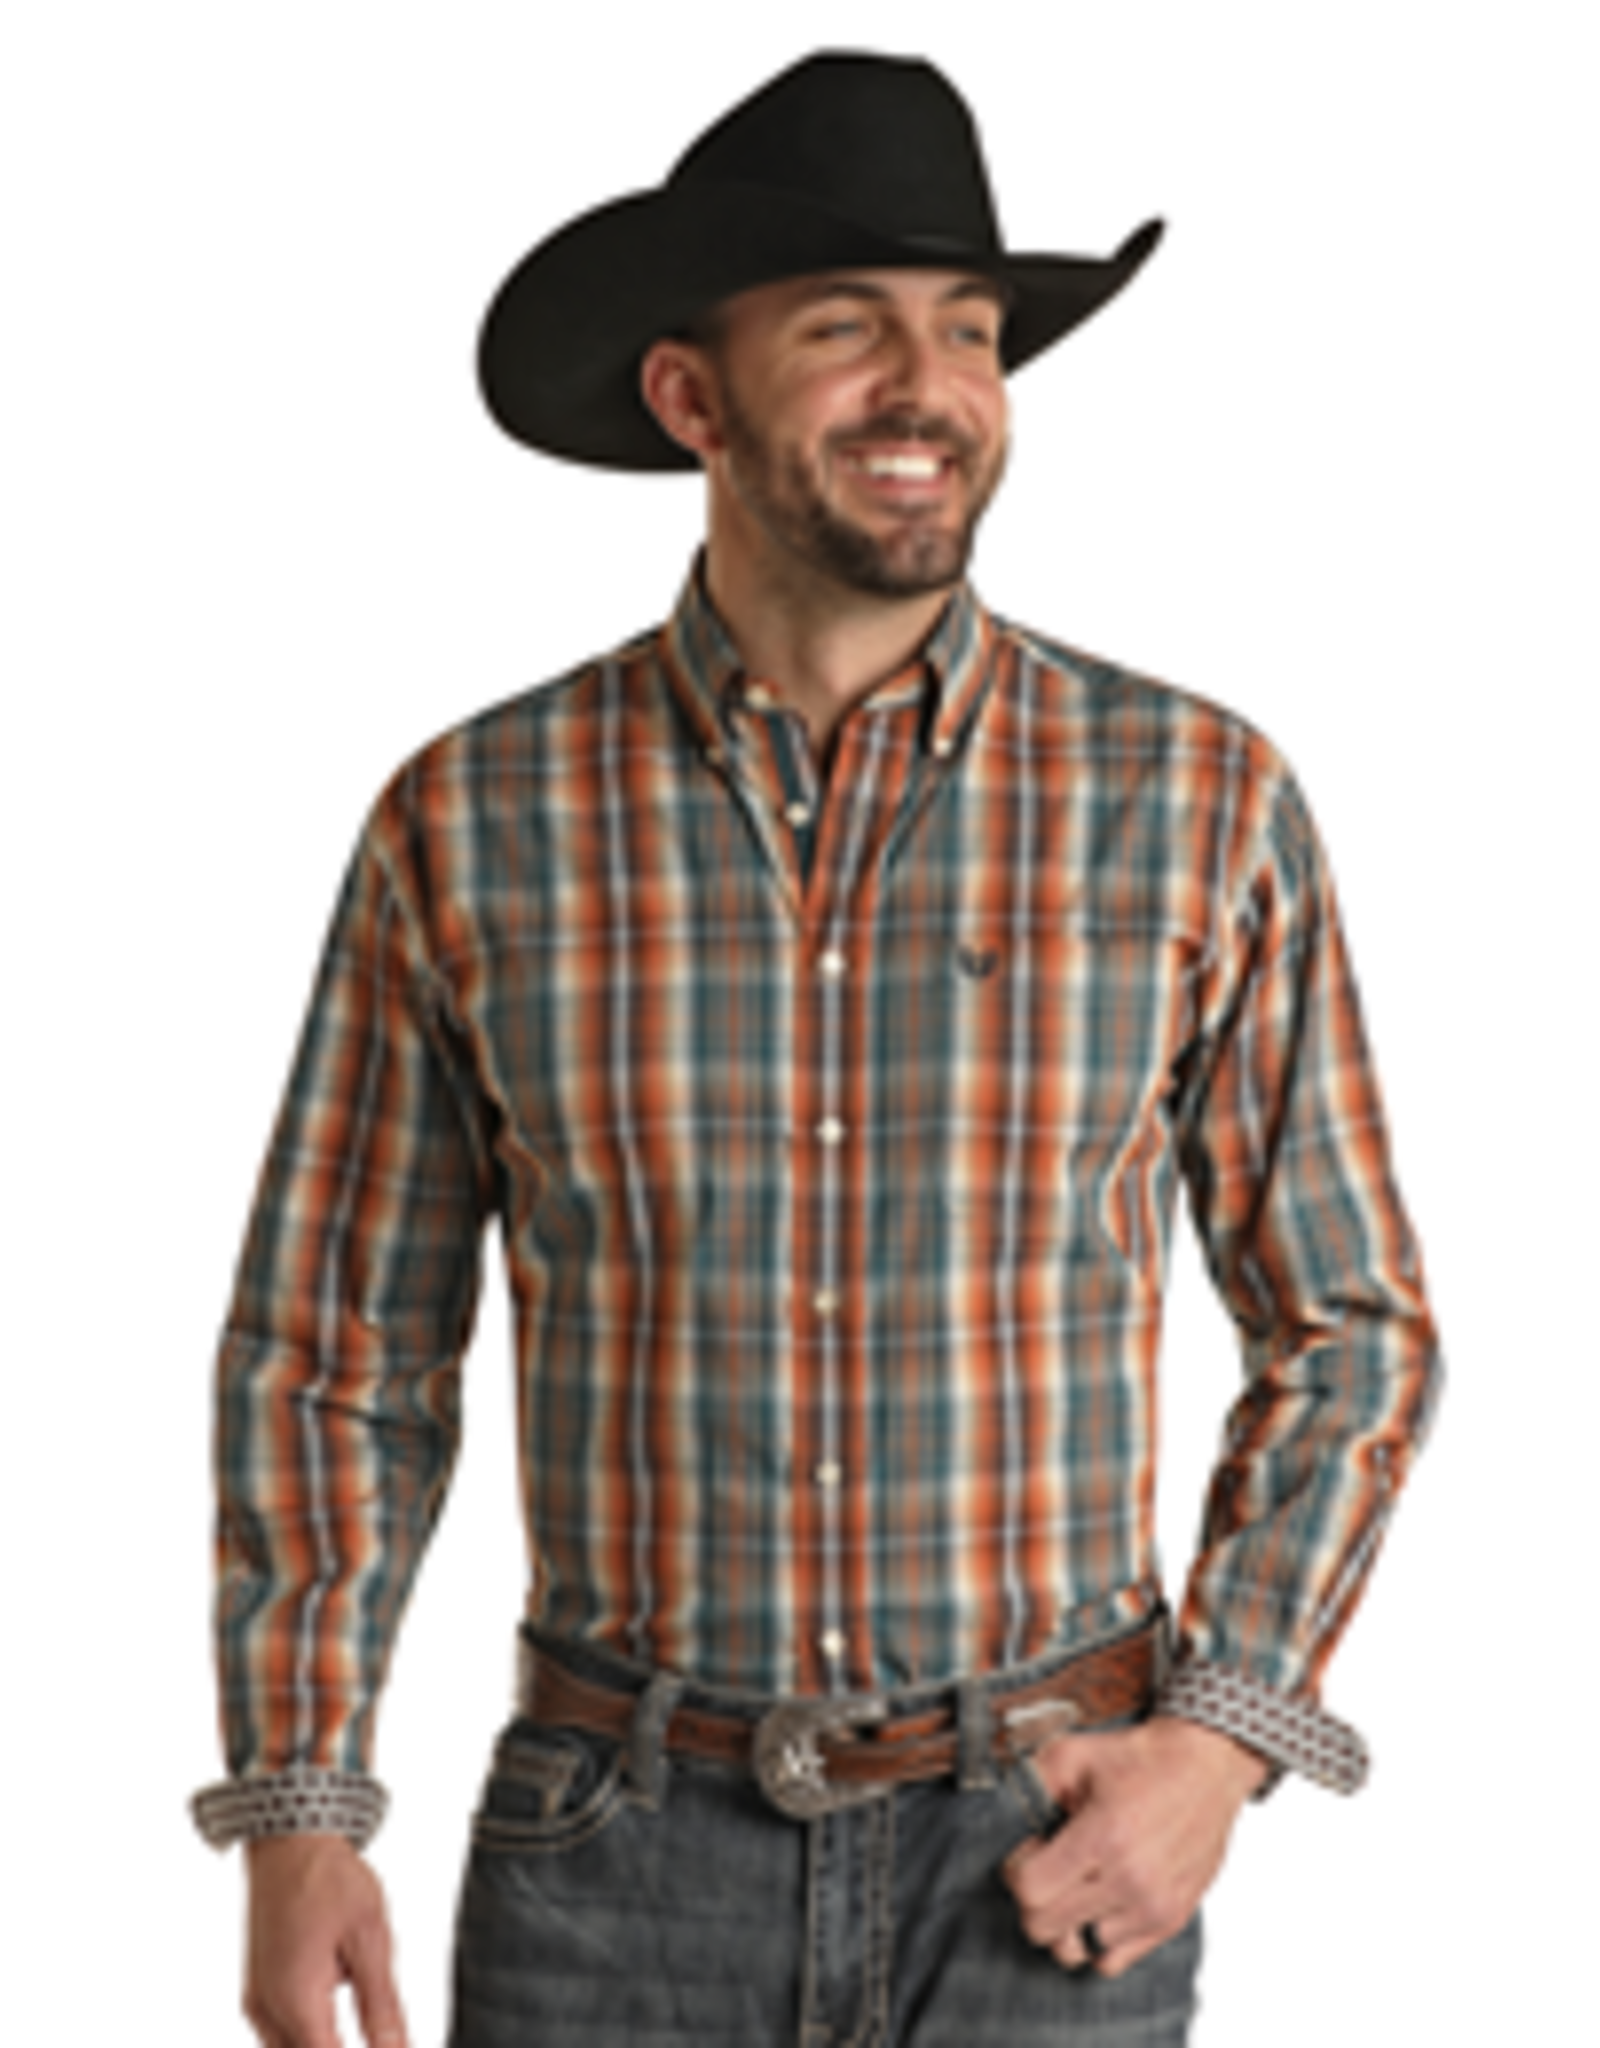 Panhandle Rough Stock Long Sleeve Button Rust